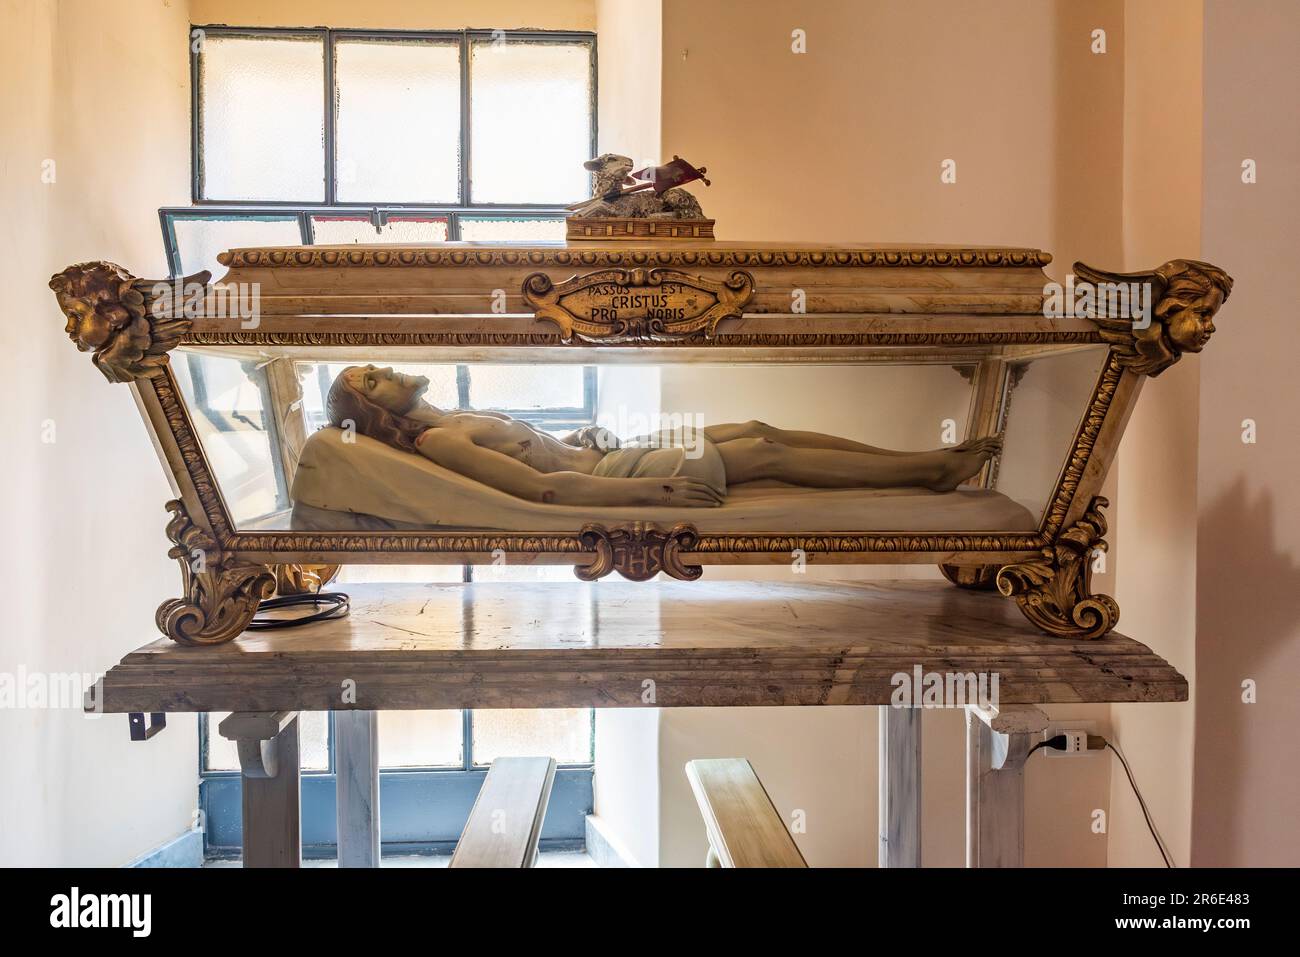 A life-sized effigy of the dead body of Jesus is displayed lying in a glass coffin, in the small village church of Motta Camastra, Sicily, Italy Stock Photo